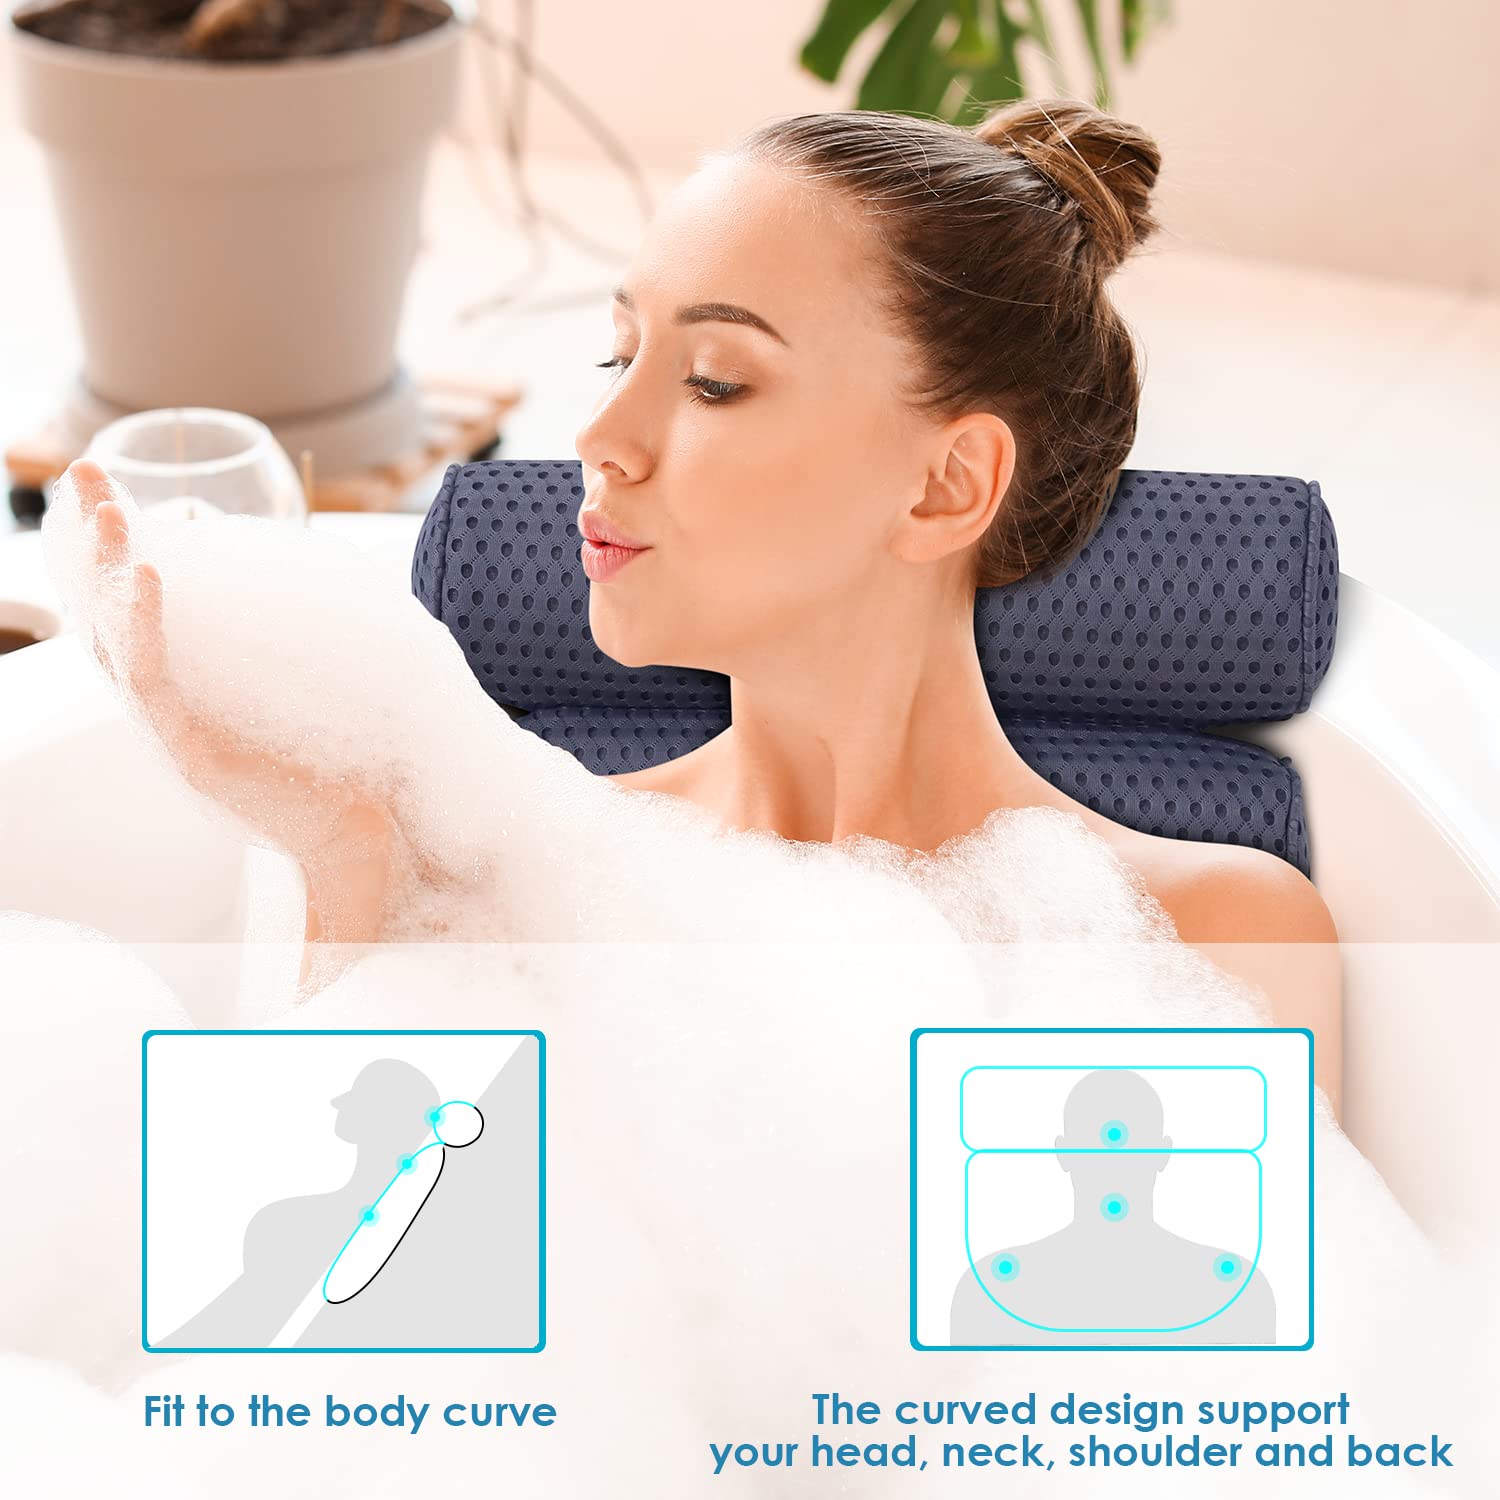 Bath Pillow for Tub Ergonomic Non-Slip Bathtub Pillow with Upgraded 4D Air Mesh Technology and 6 Non-Slip Strong Suction Cup, Relaxing Spa Bath Pillow Headrest Blue